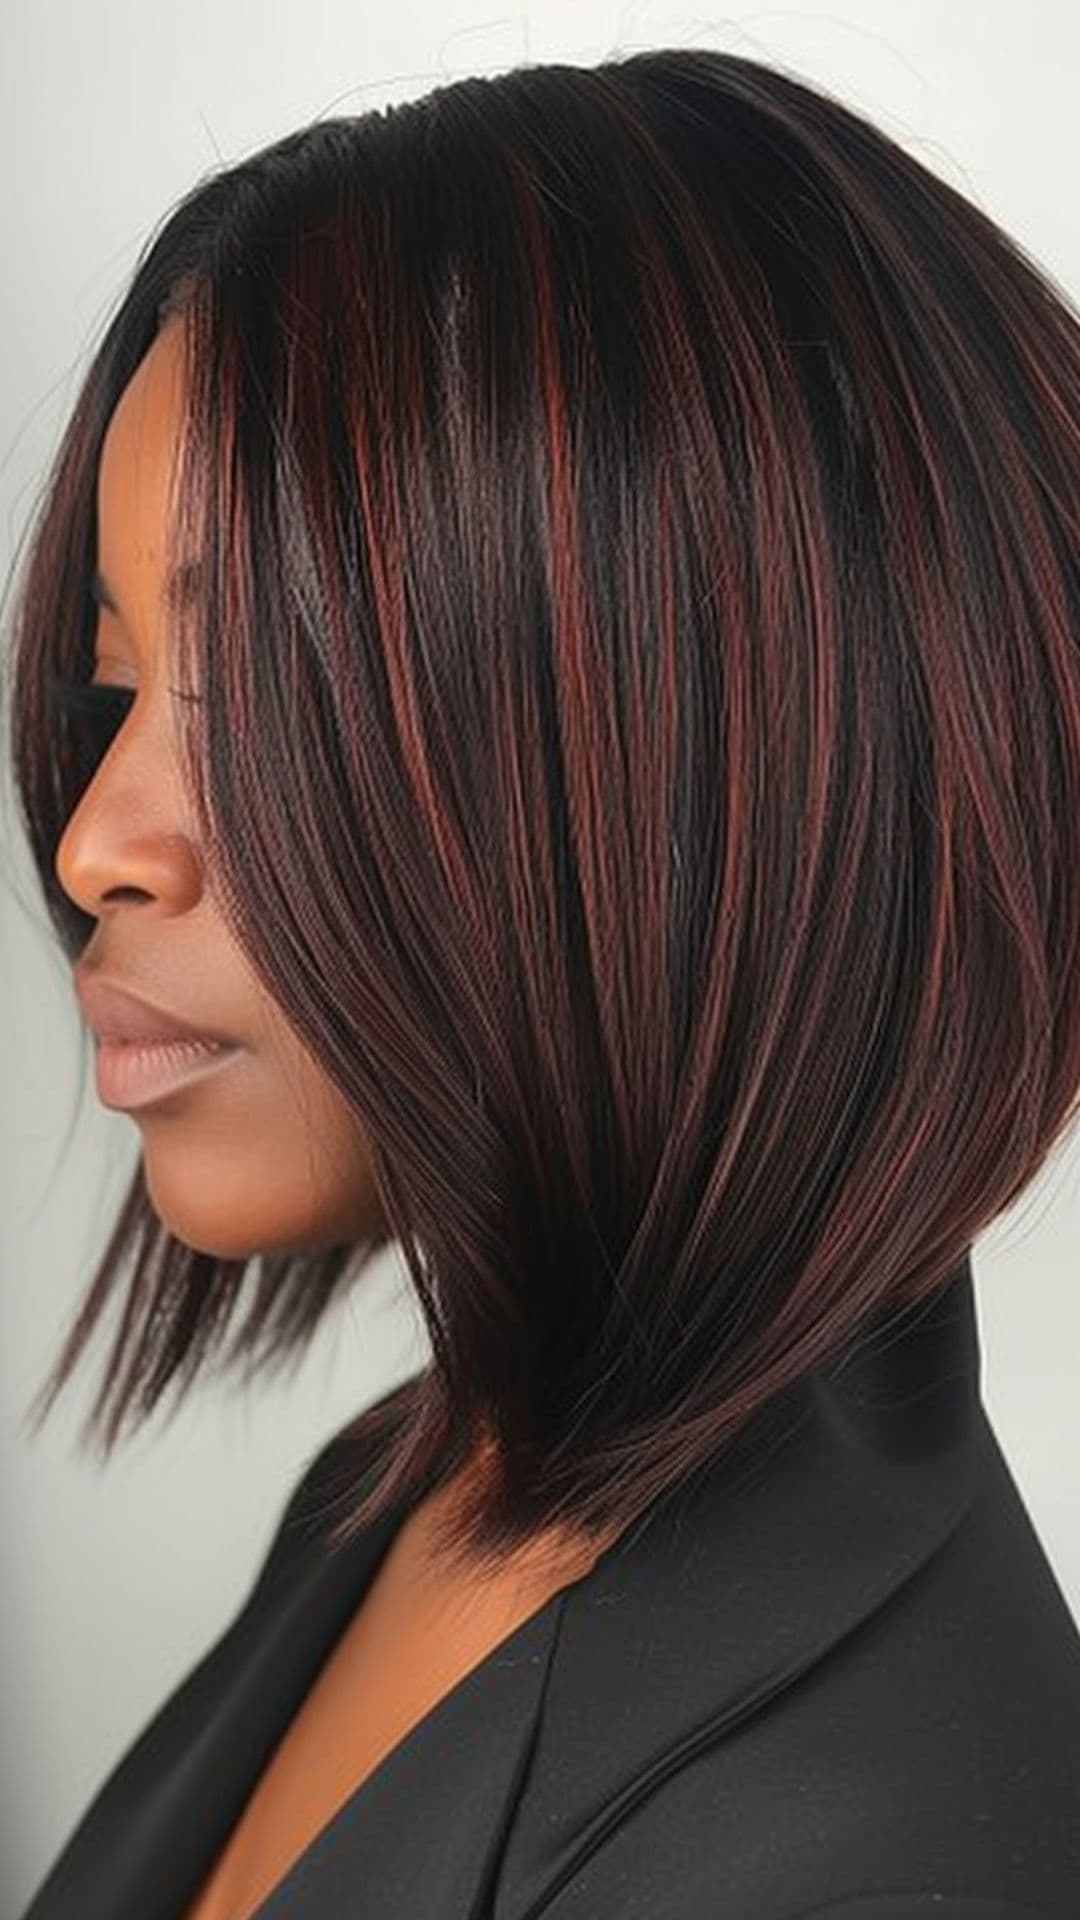 A woman modelling a black hair with copper and mahogany highlights.